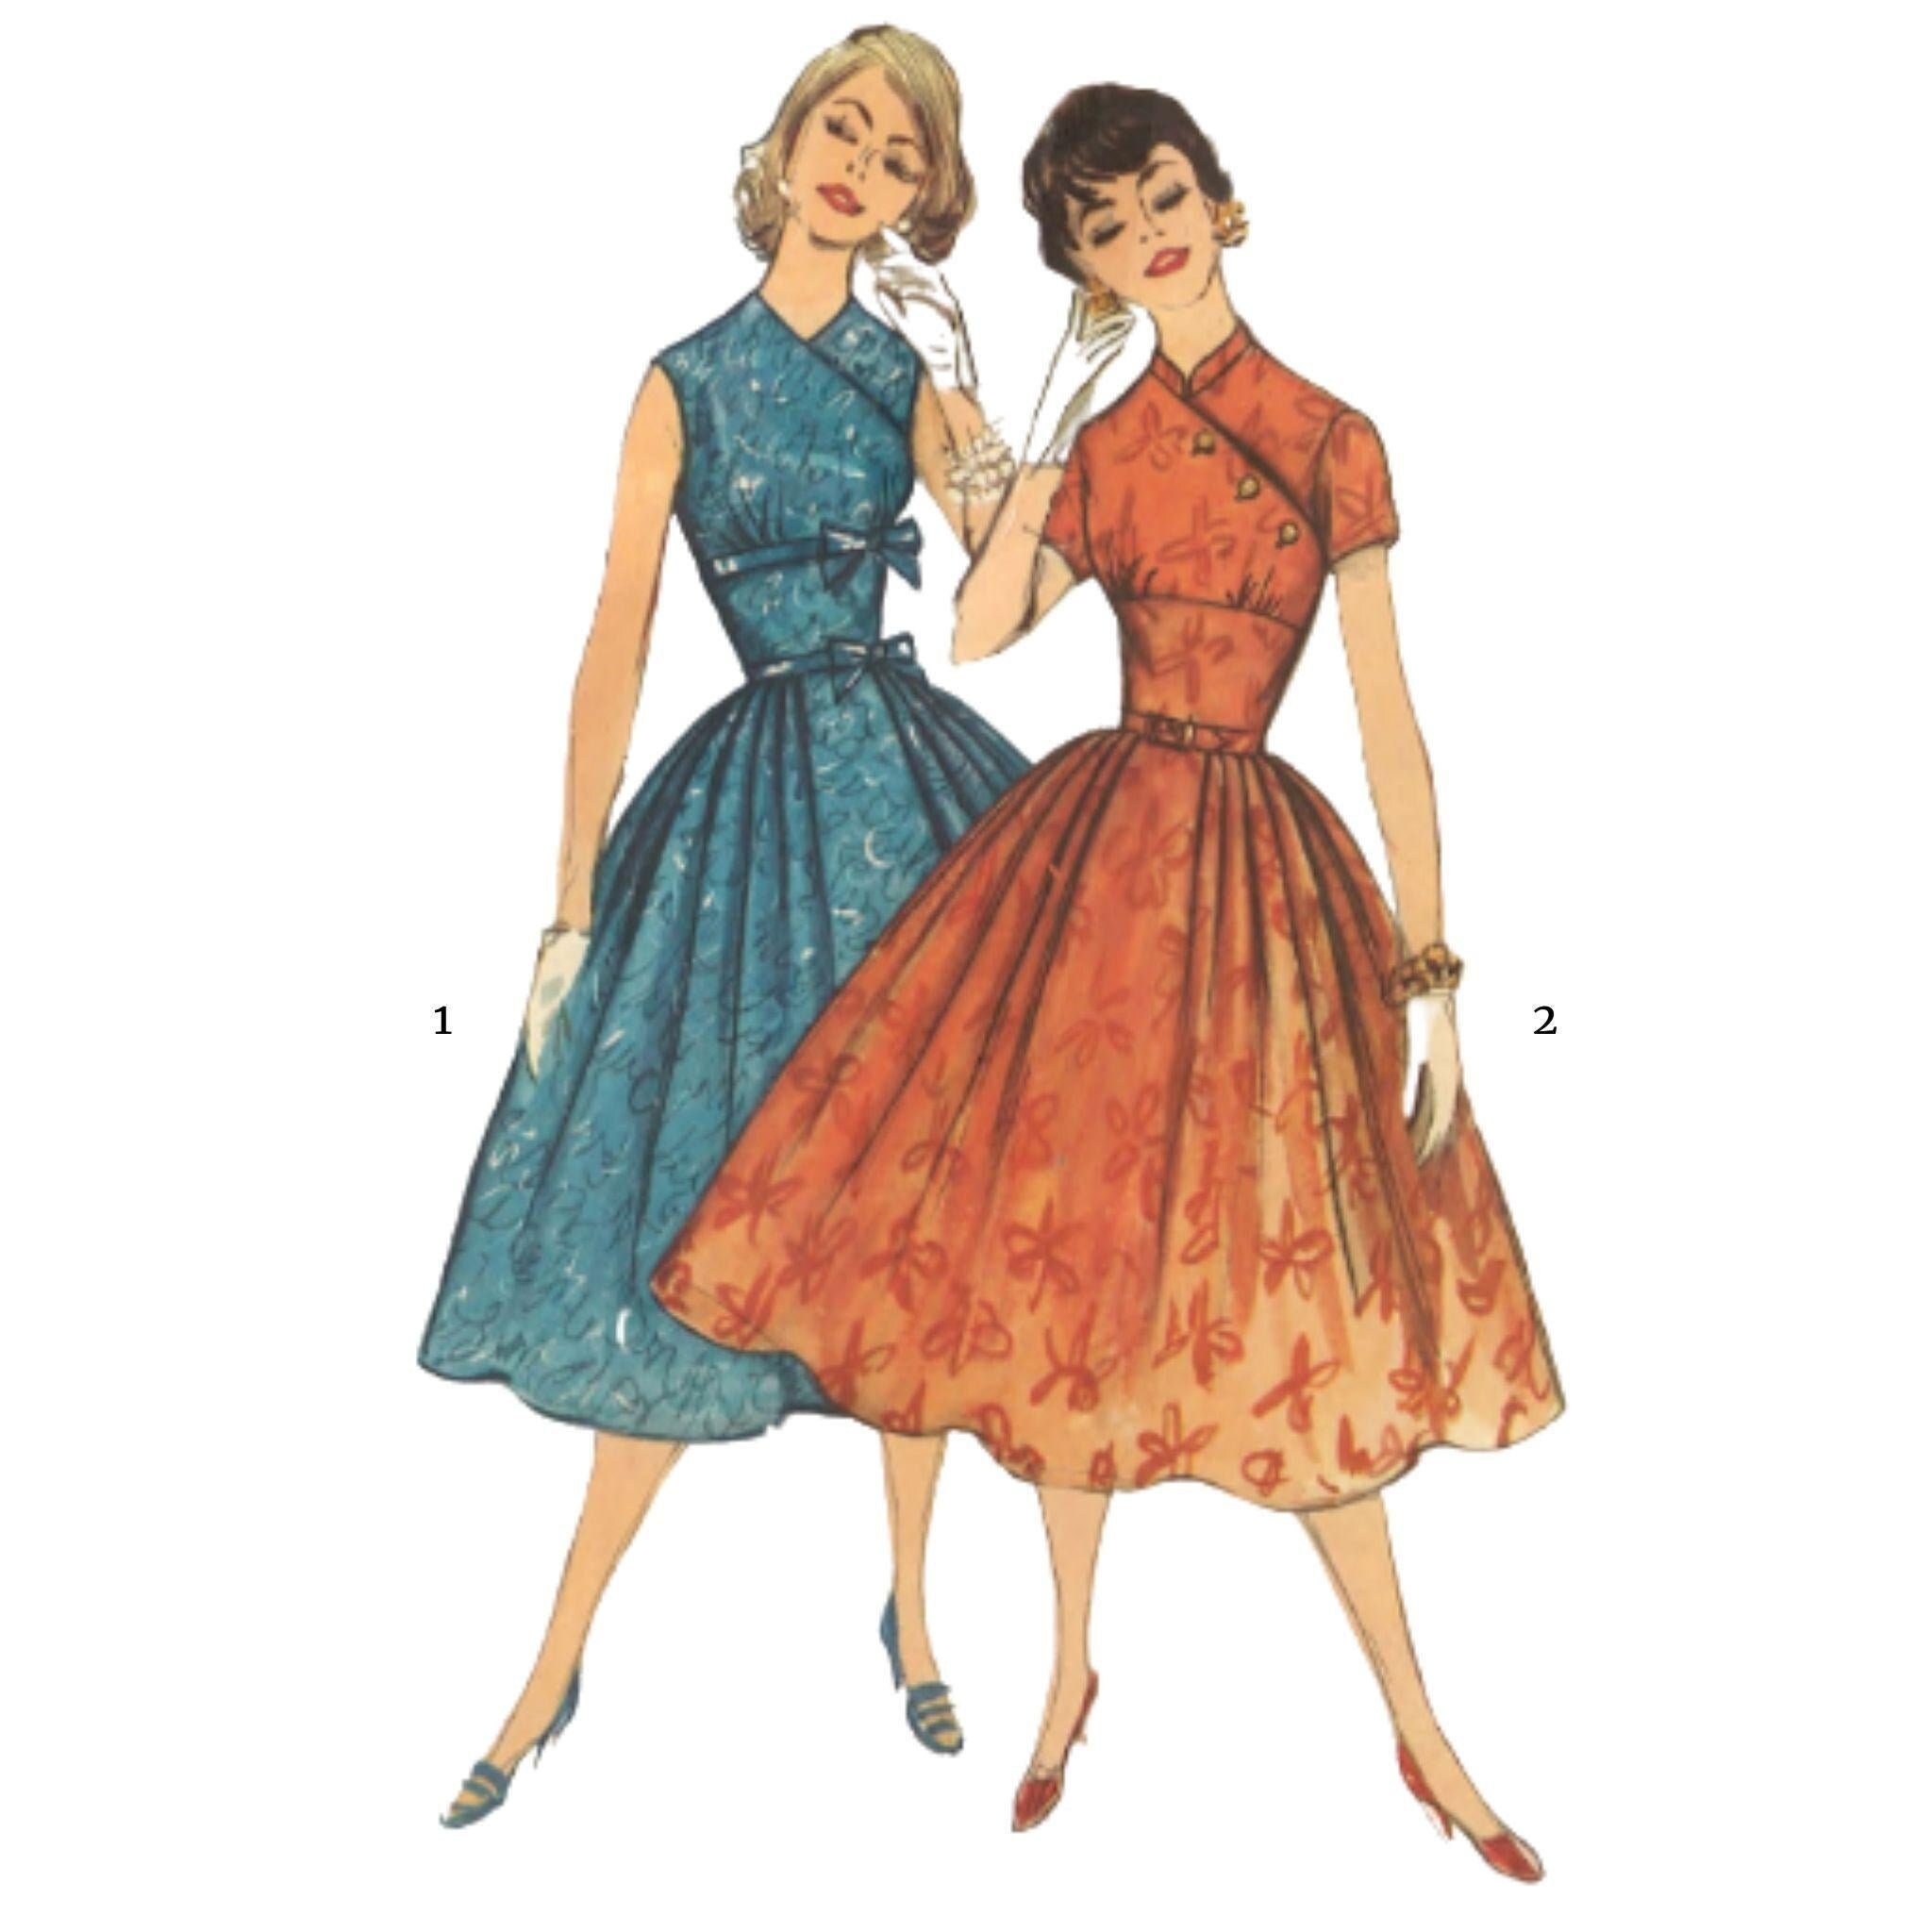 Vintage 1950's Sewing Pattern: Empire Style Dress Bust 32 81.3cm